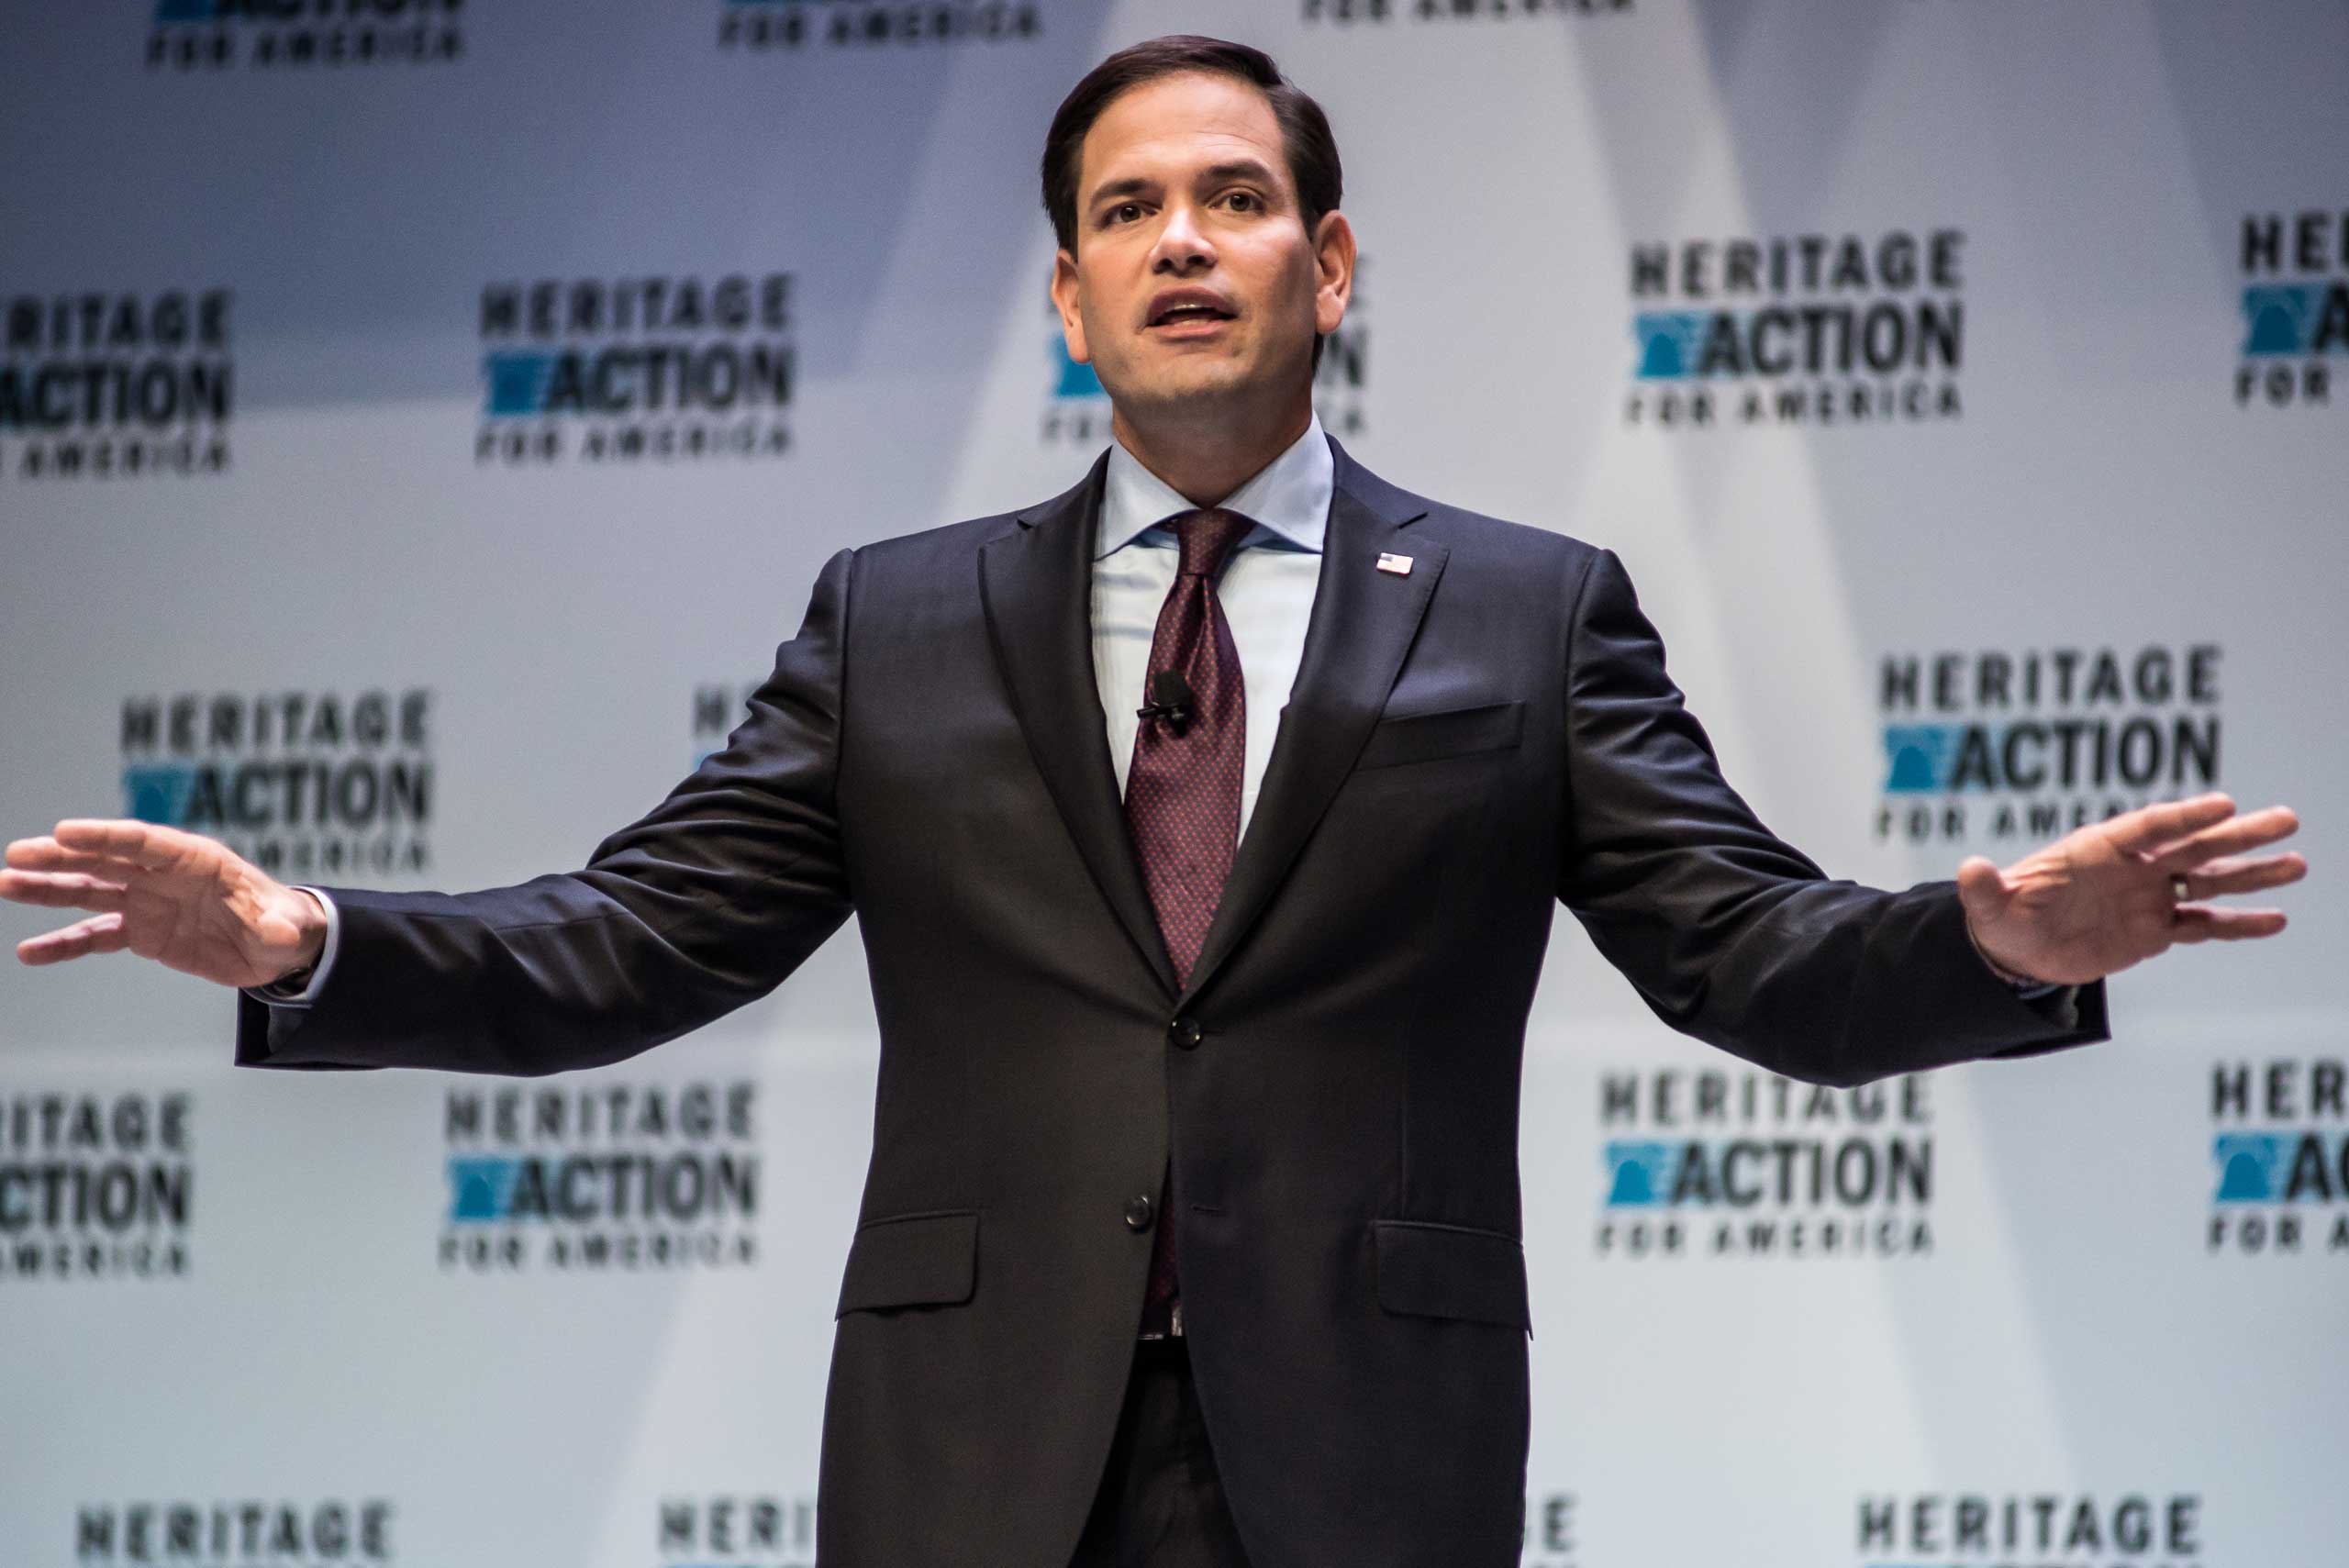 Sen. Marco Rubio  (R-FL) speaks to voters at the Heritage Action Presidential Candidate Forum in Greenville, South Carolina, Sept. 18, 2015 (Sean Rayford—Getty Images)